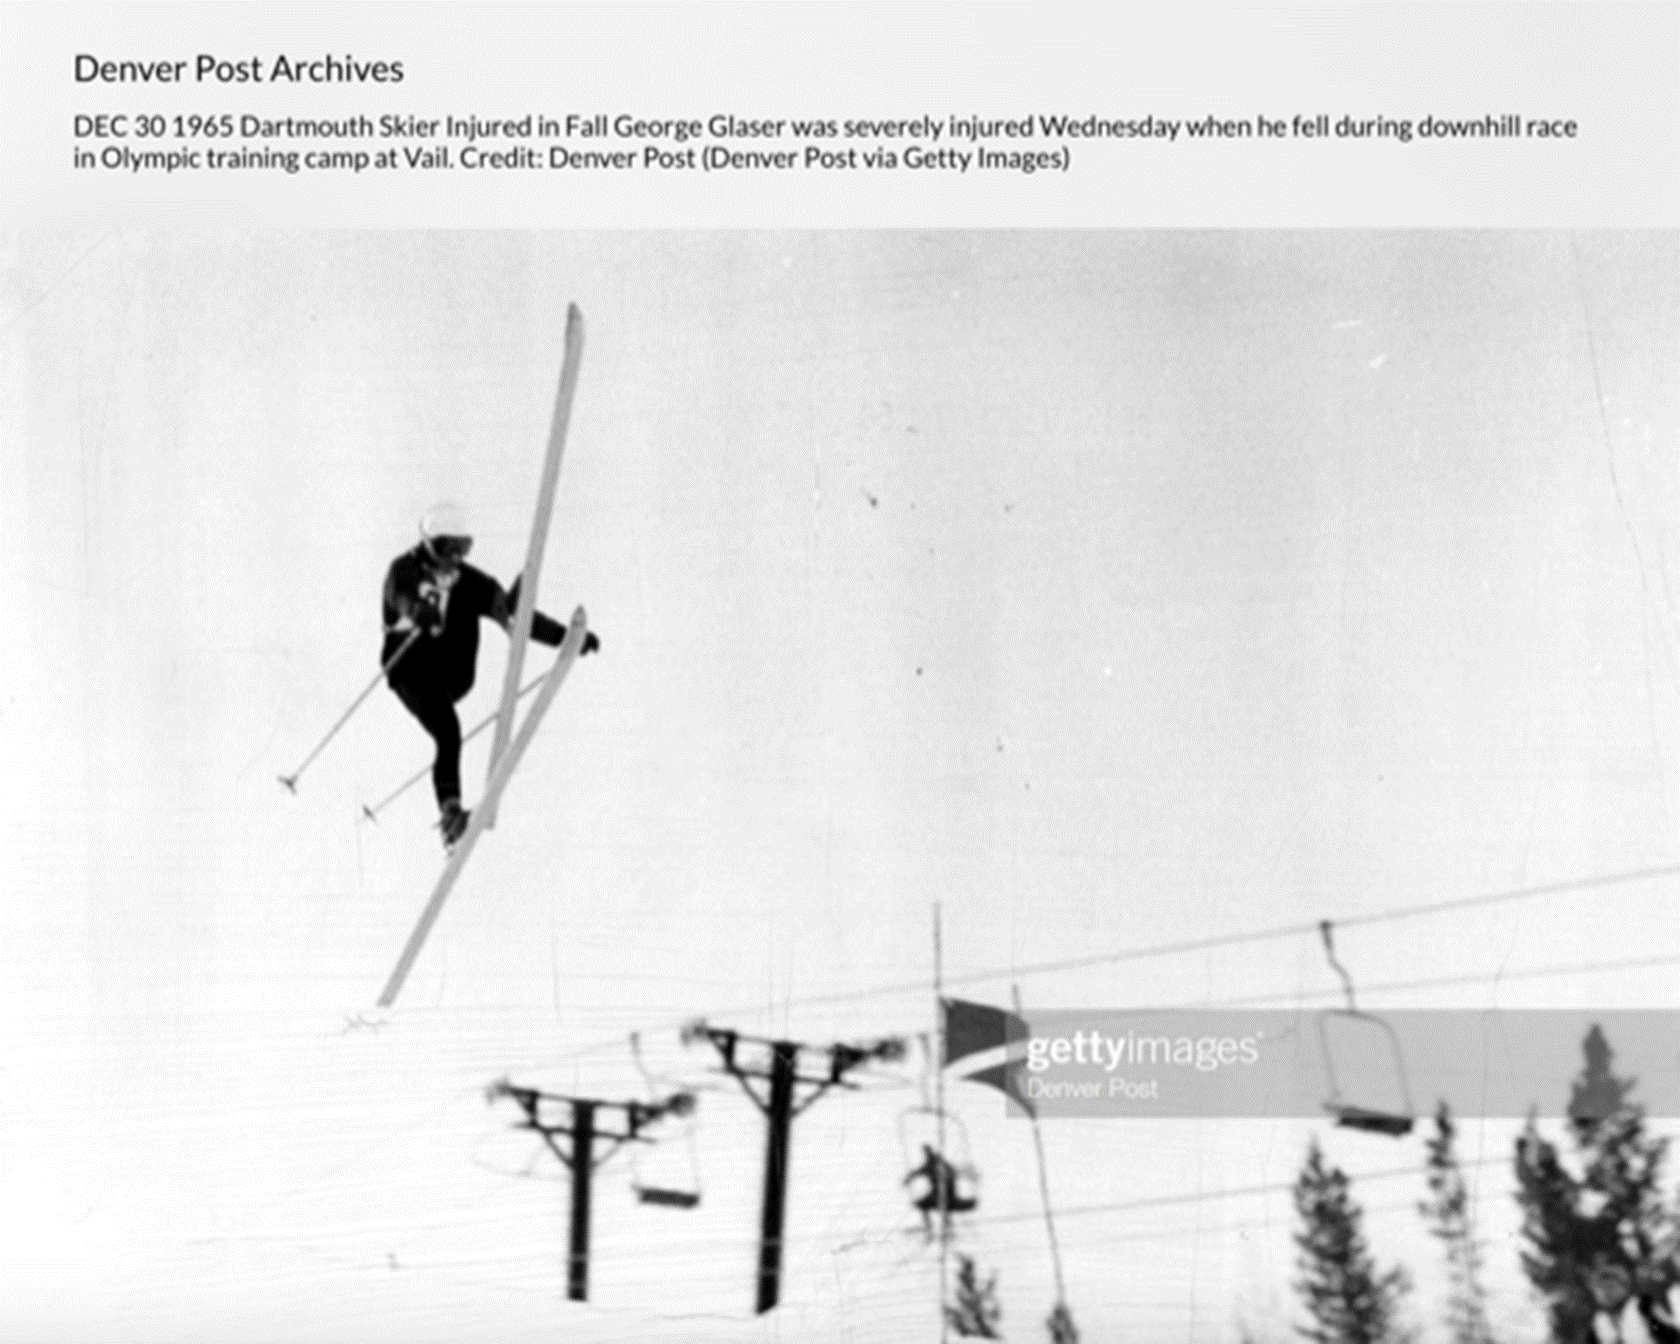 A person flying through the air while riding skis

Description automatically generated